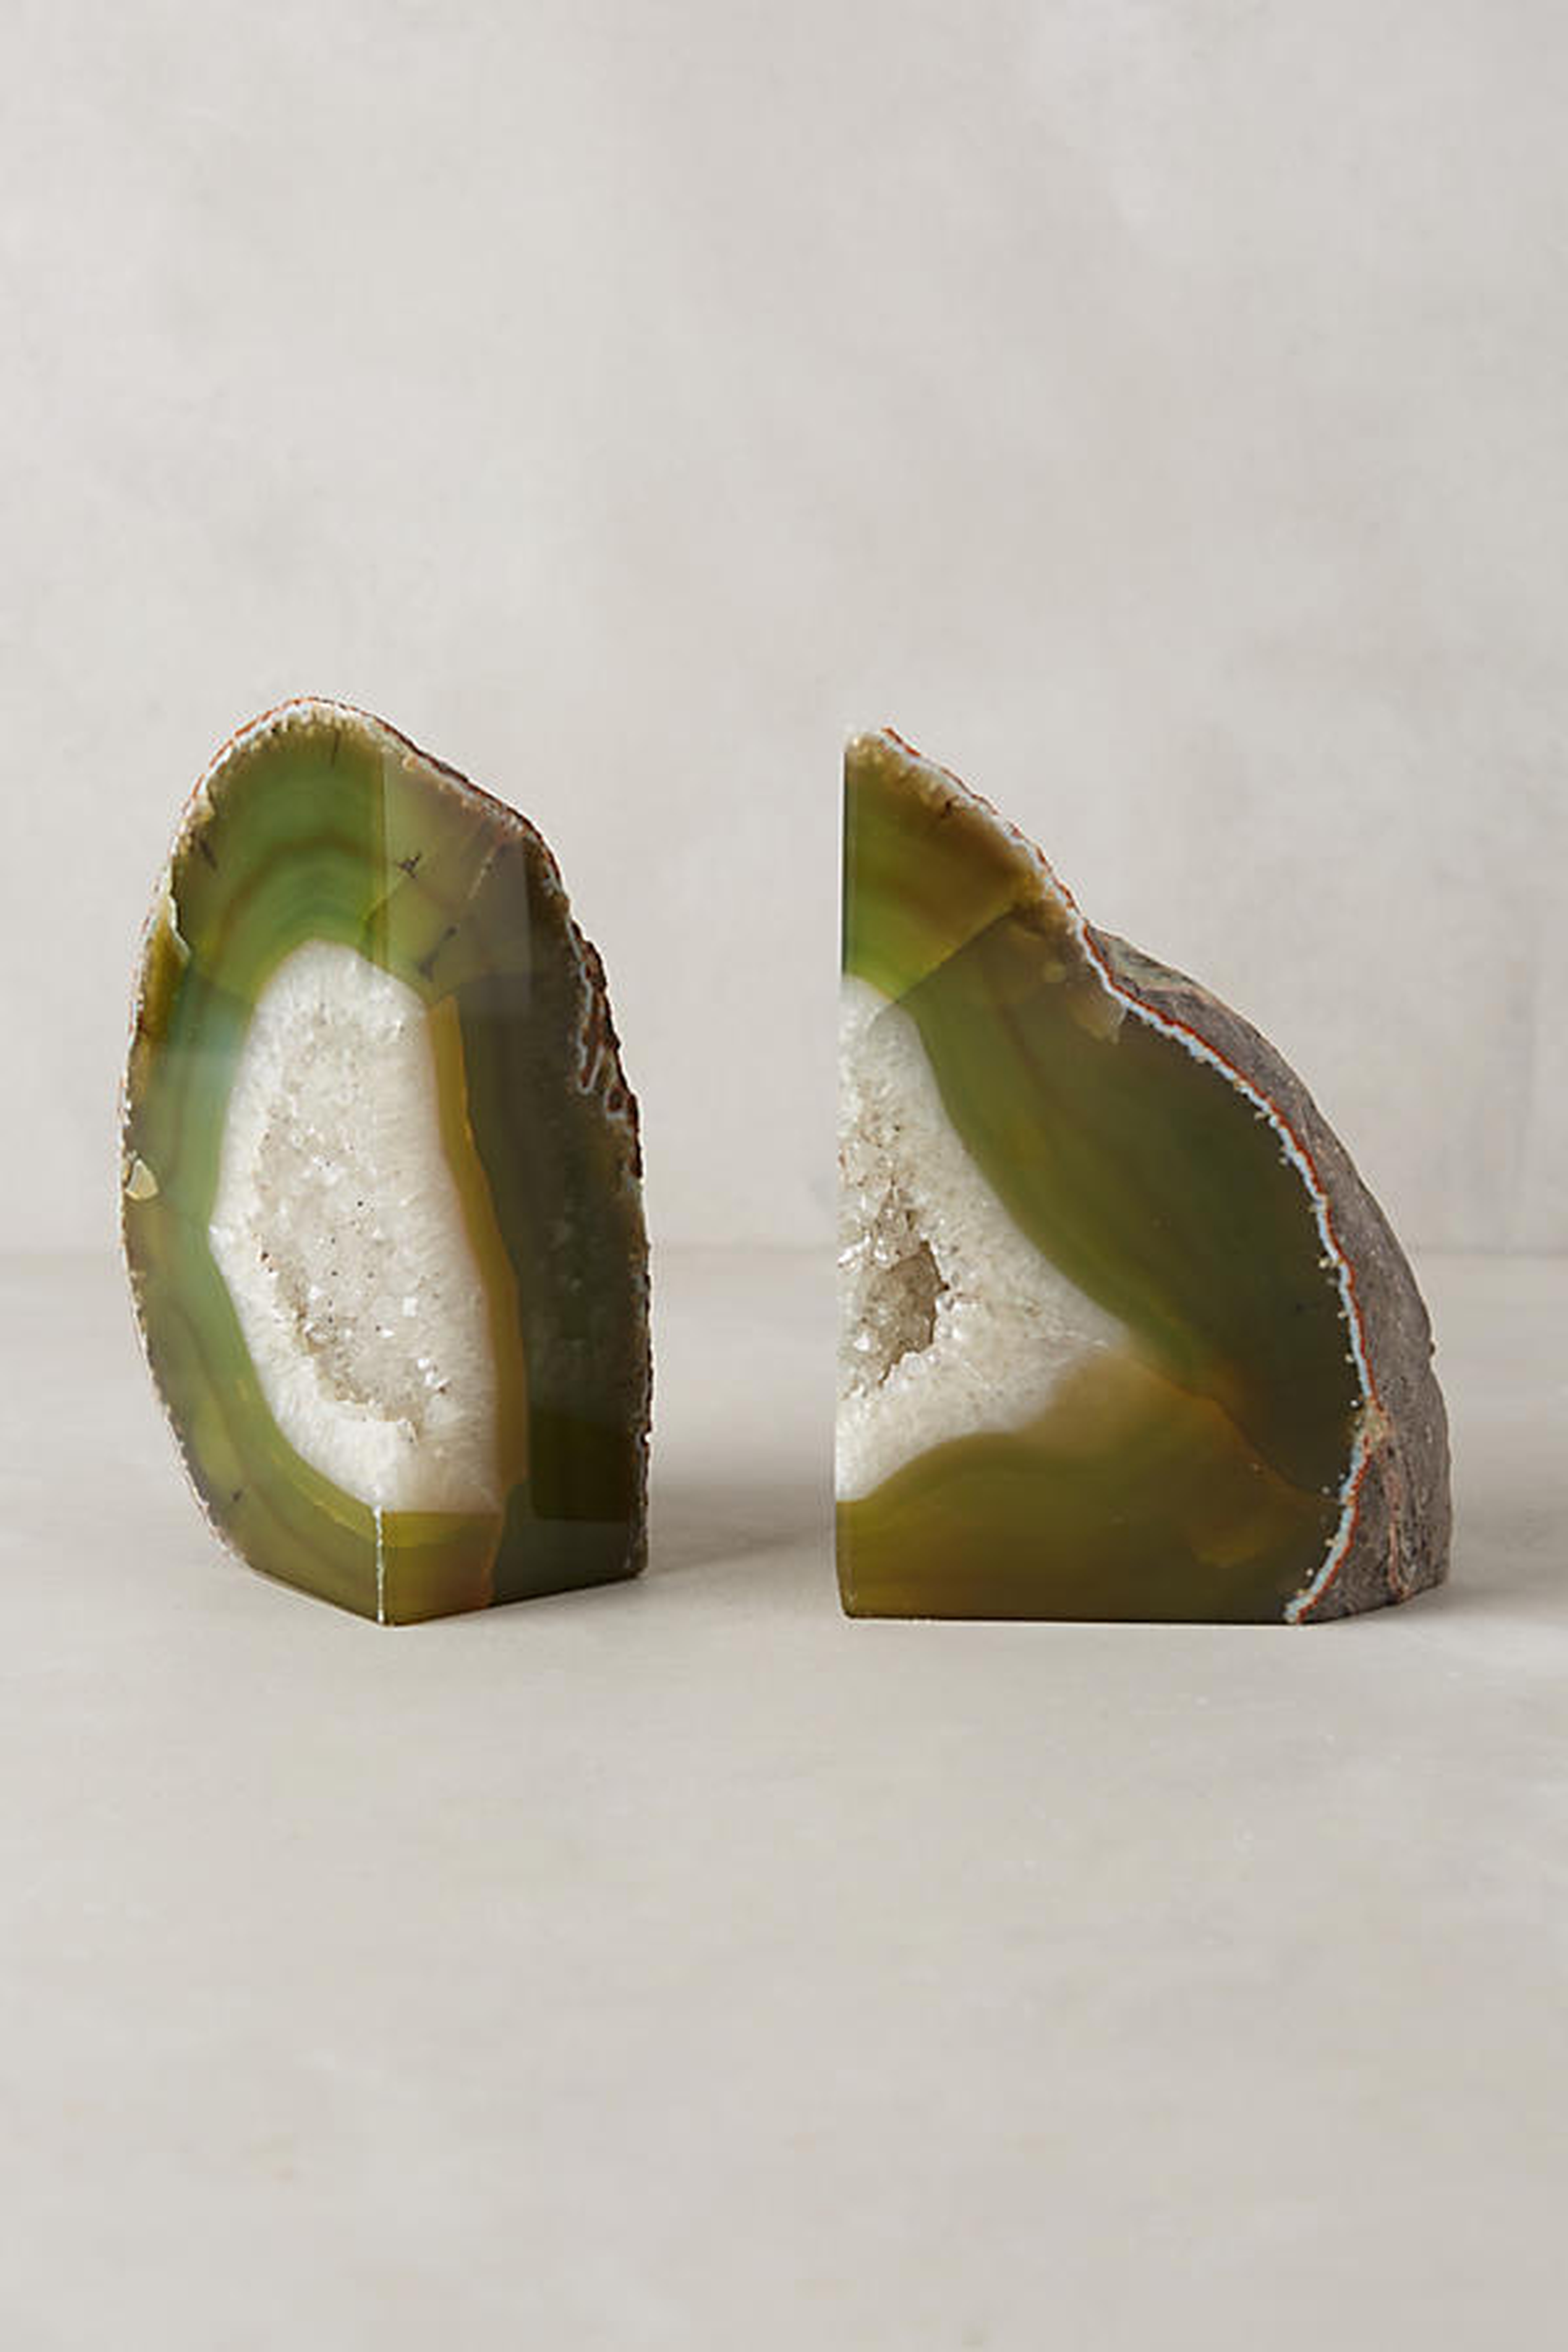 Hand-Cut Agate Bookends - Anthropologie